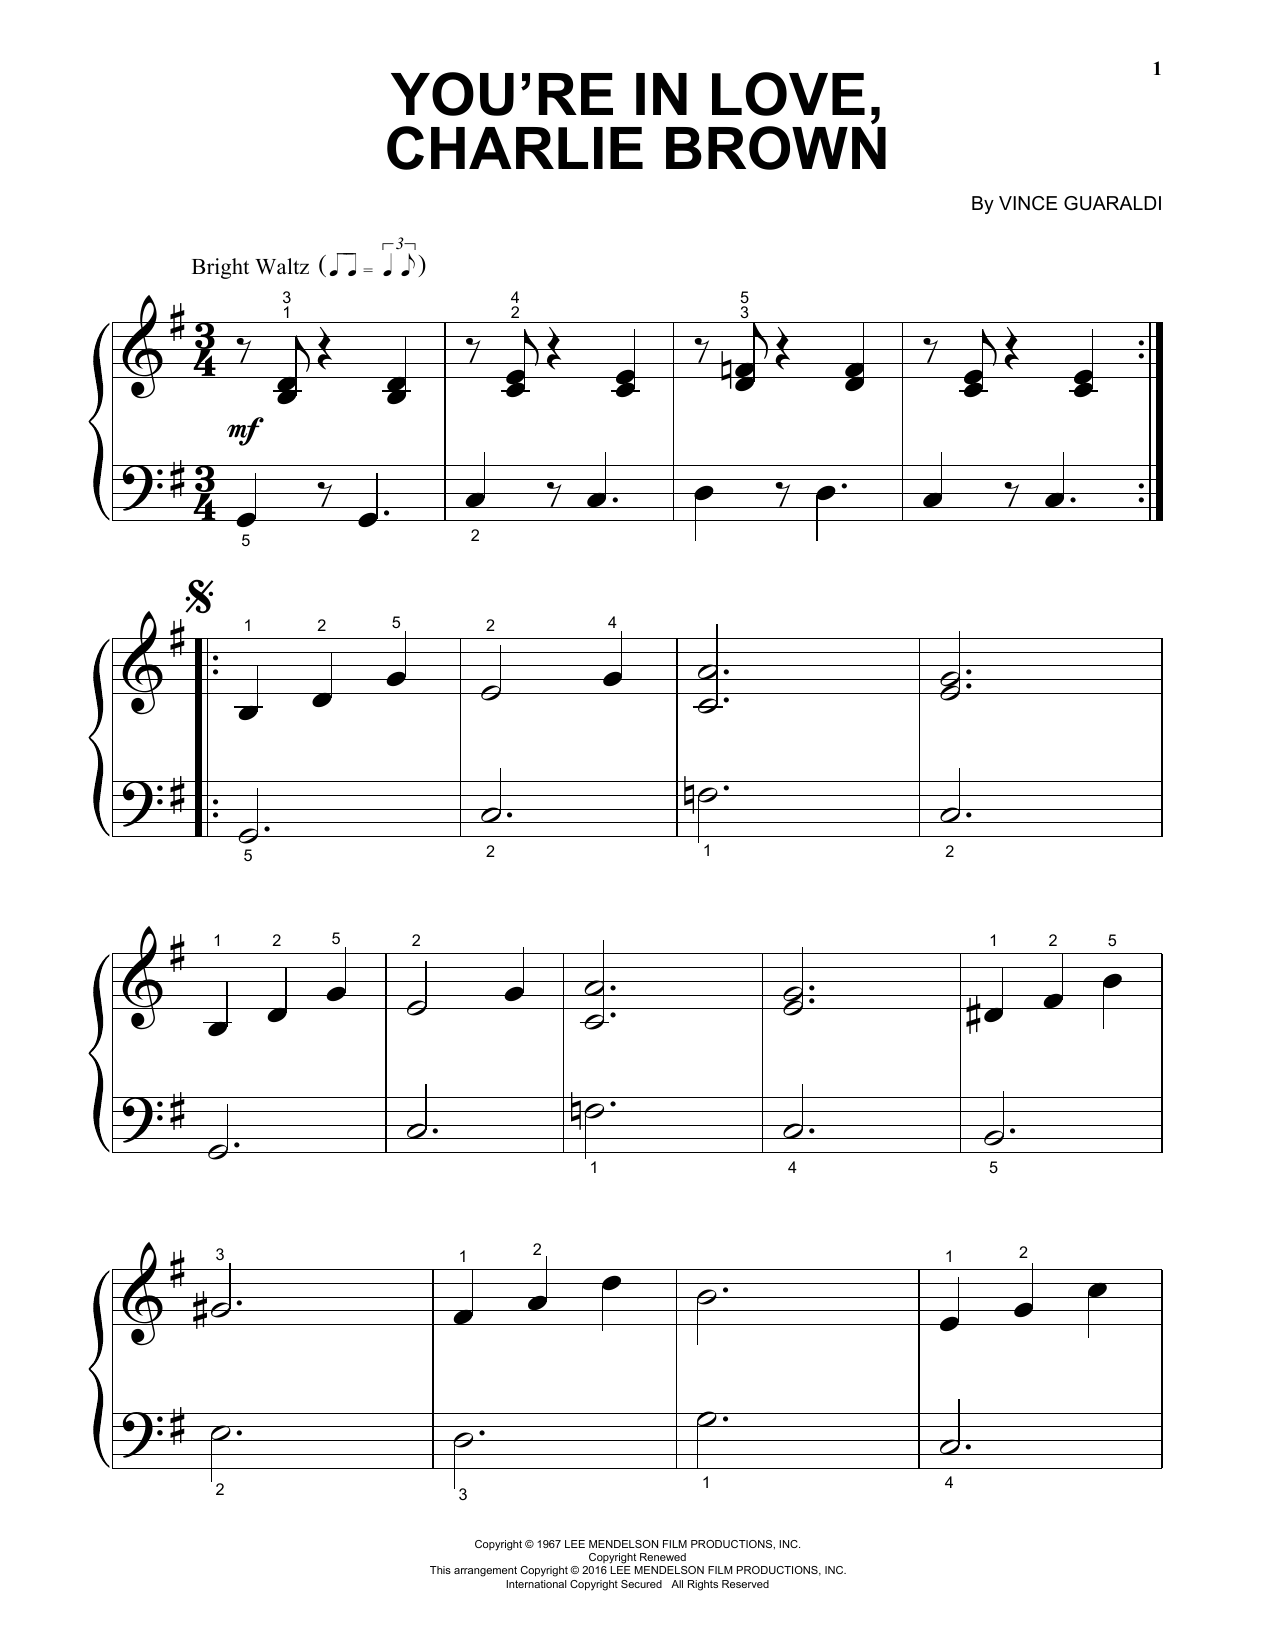 Download Vince Guaraldi You're In Love, Charlie Brown Sheet Music